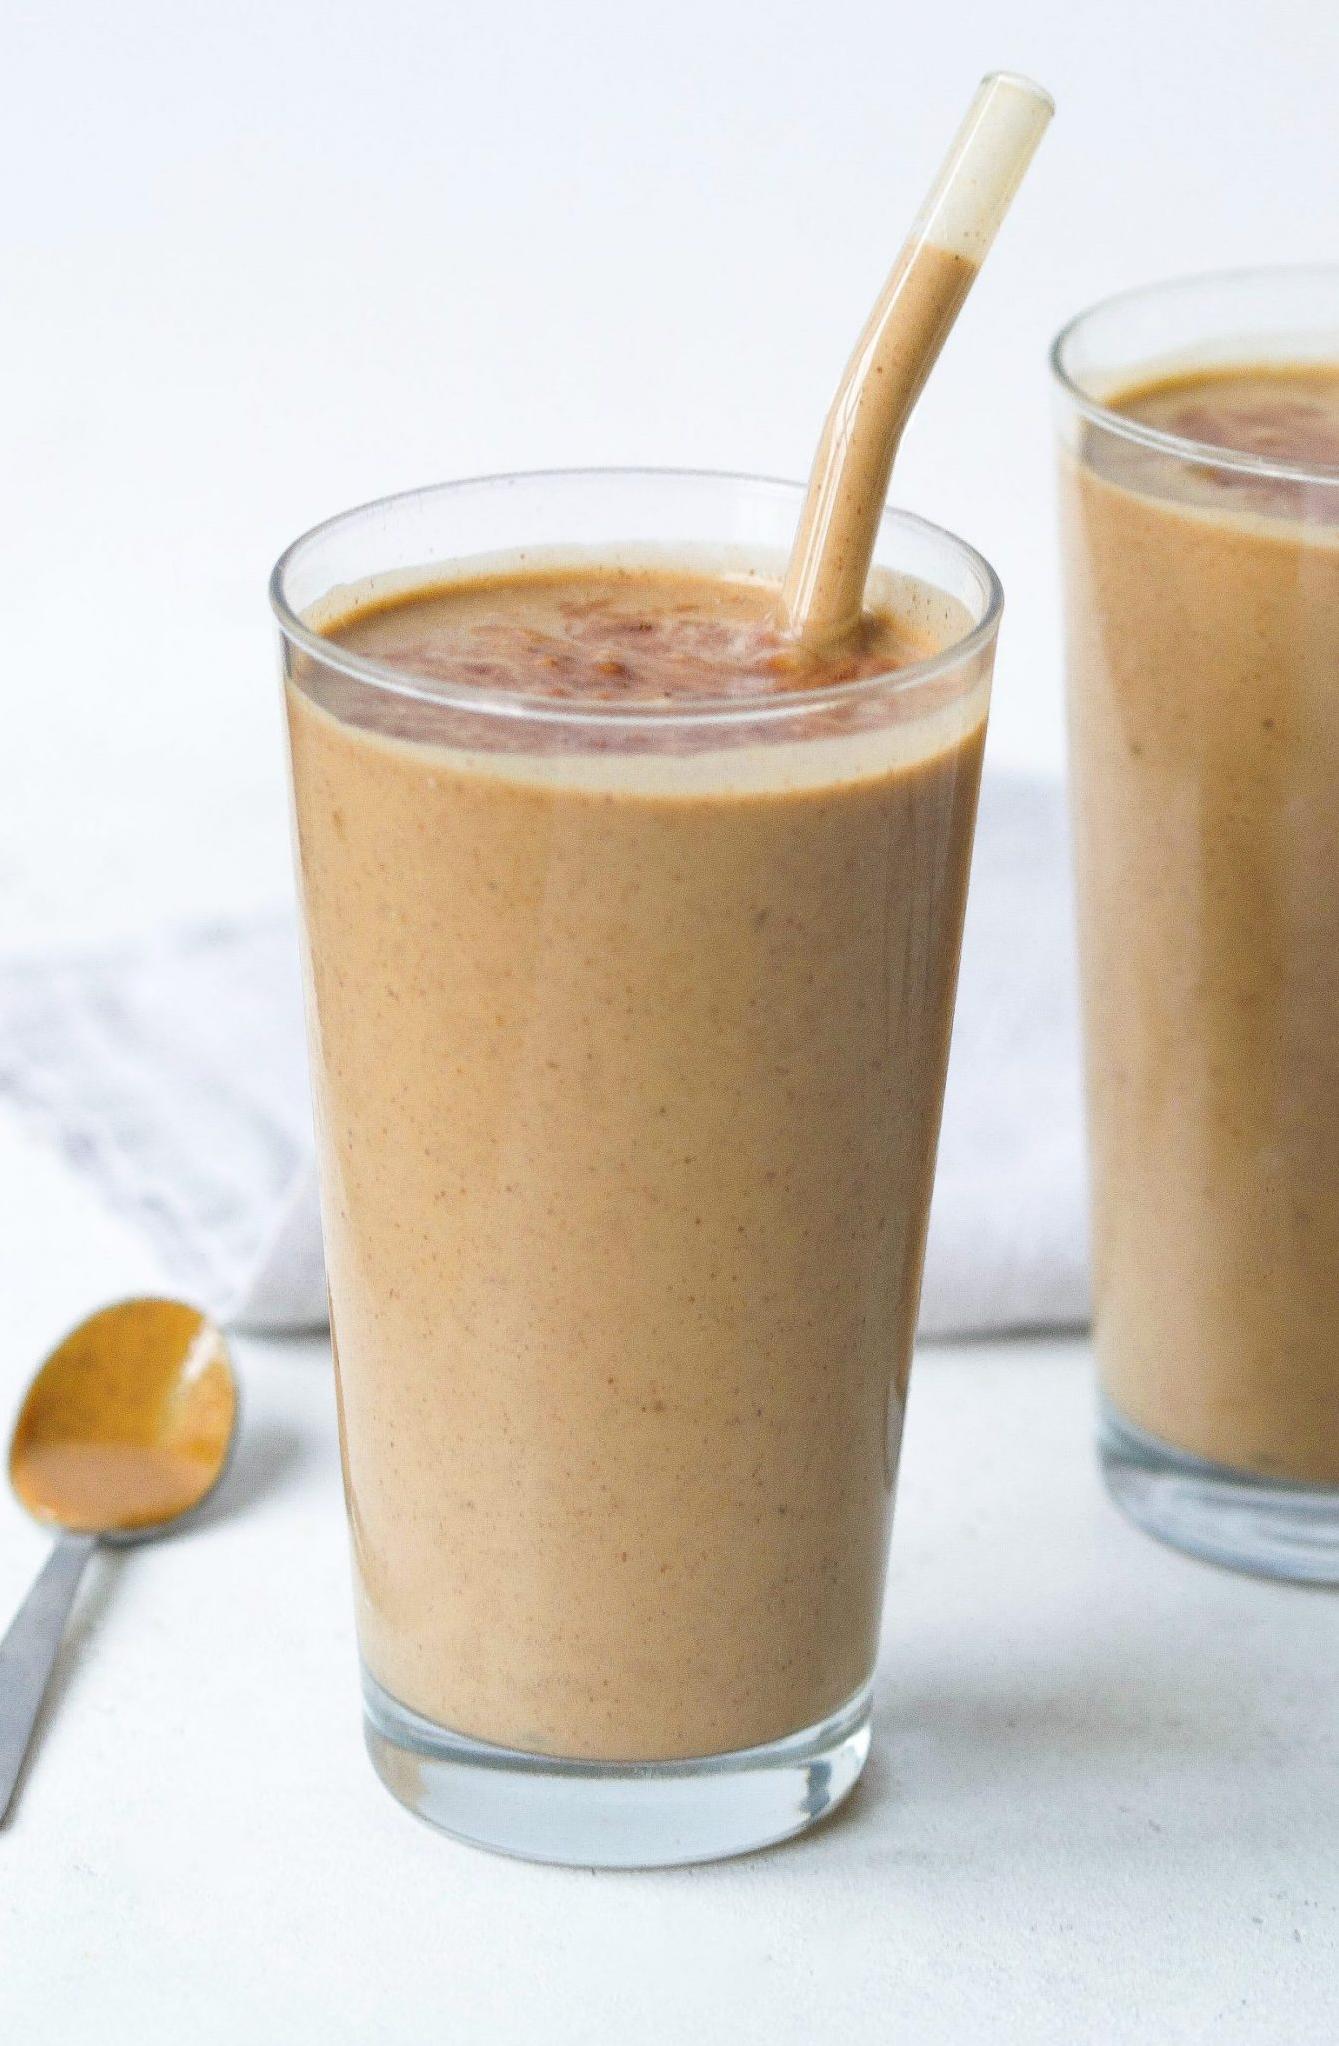  This smoothie is the perfect pick-me-up for any time of day.